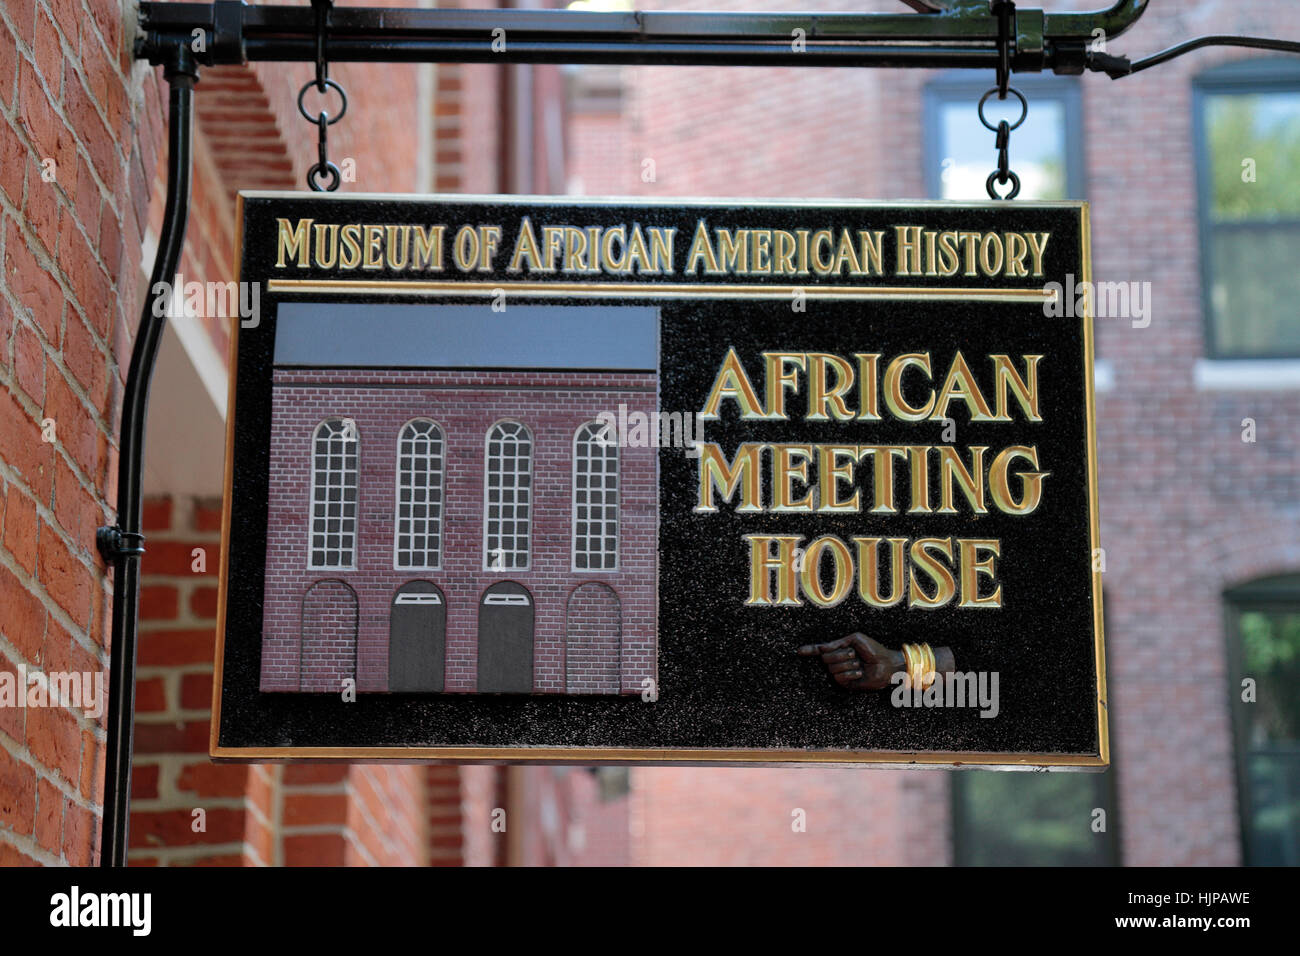 The African Meeting House museum sign, Smith Street, Black Heritage Trail, Beacon Hill, Boston, Massachusetts, United States. Stock Photo